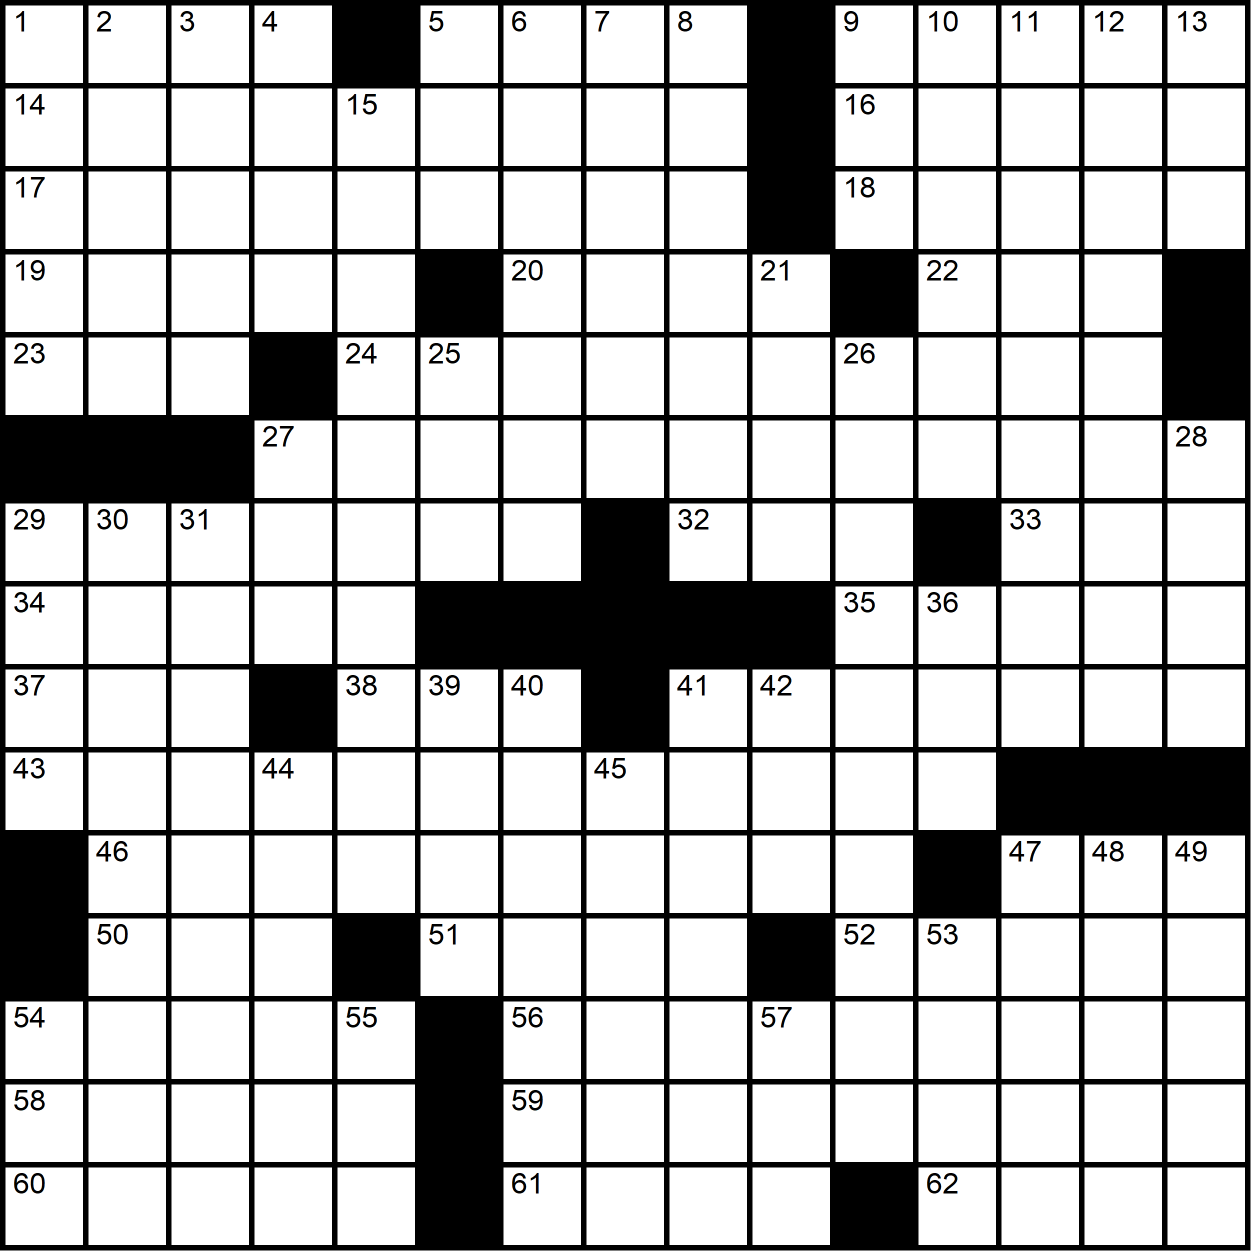 A themeless crossword grid with a black cross at the center.